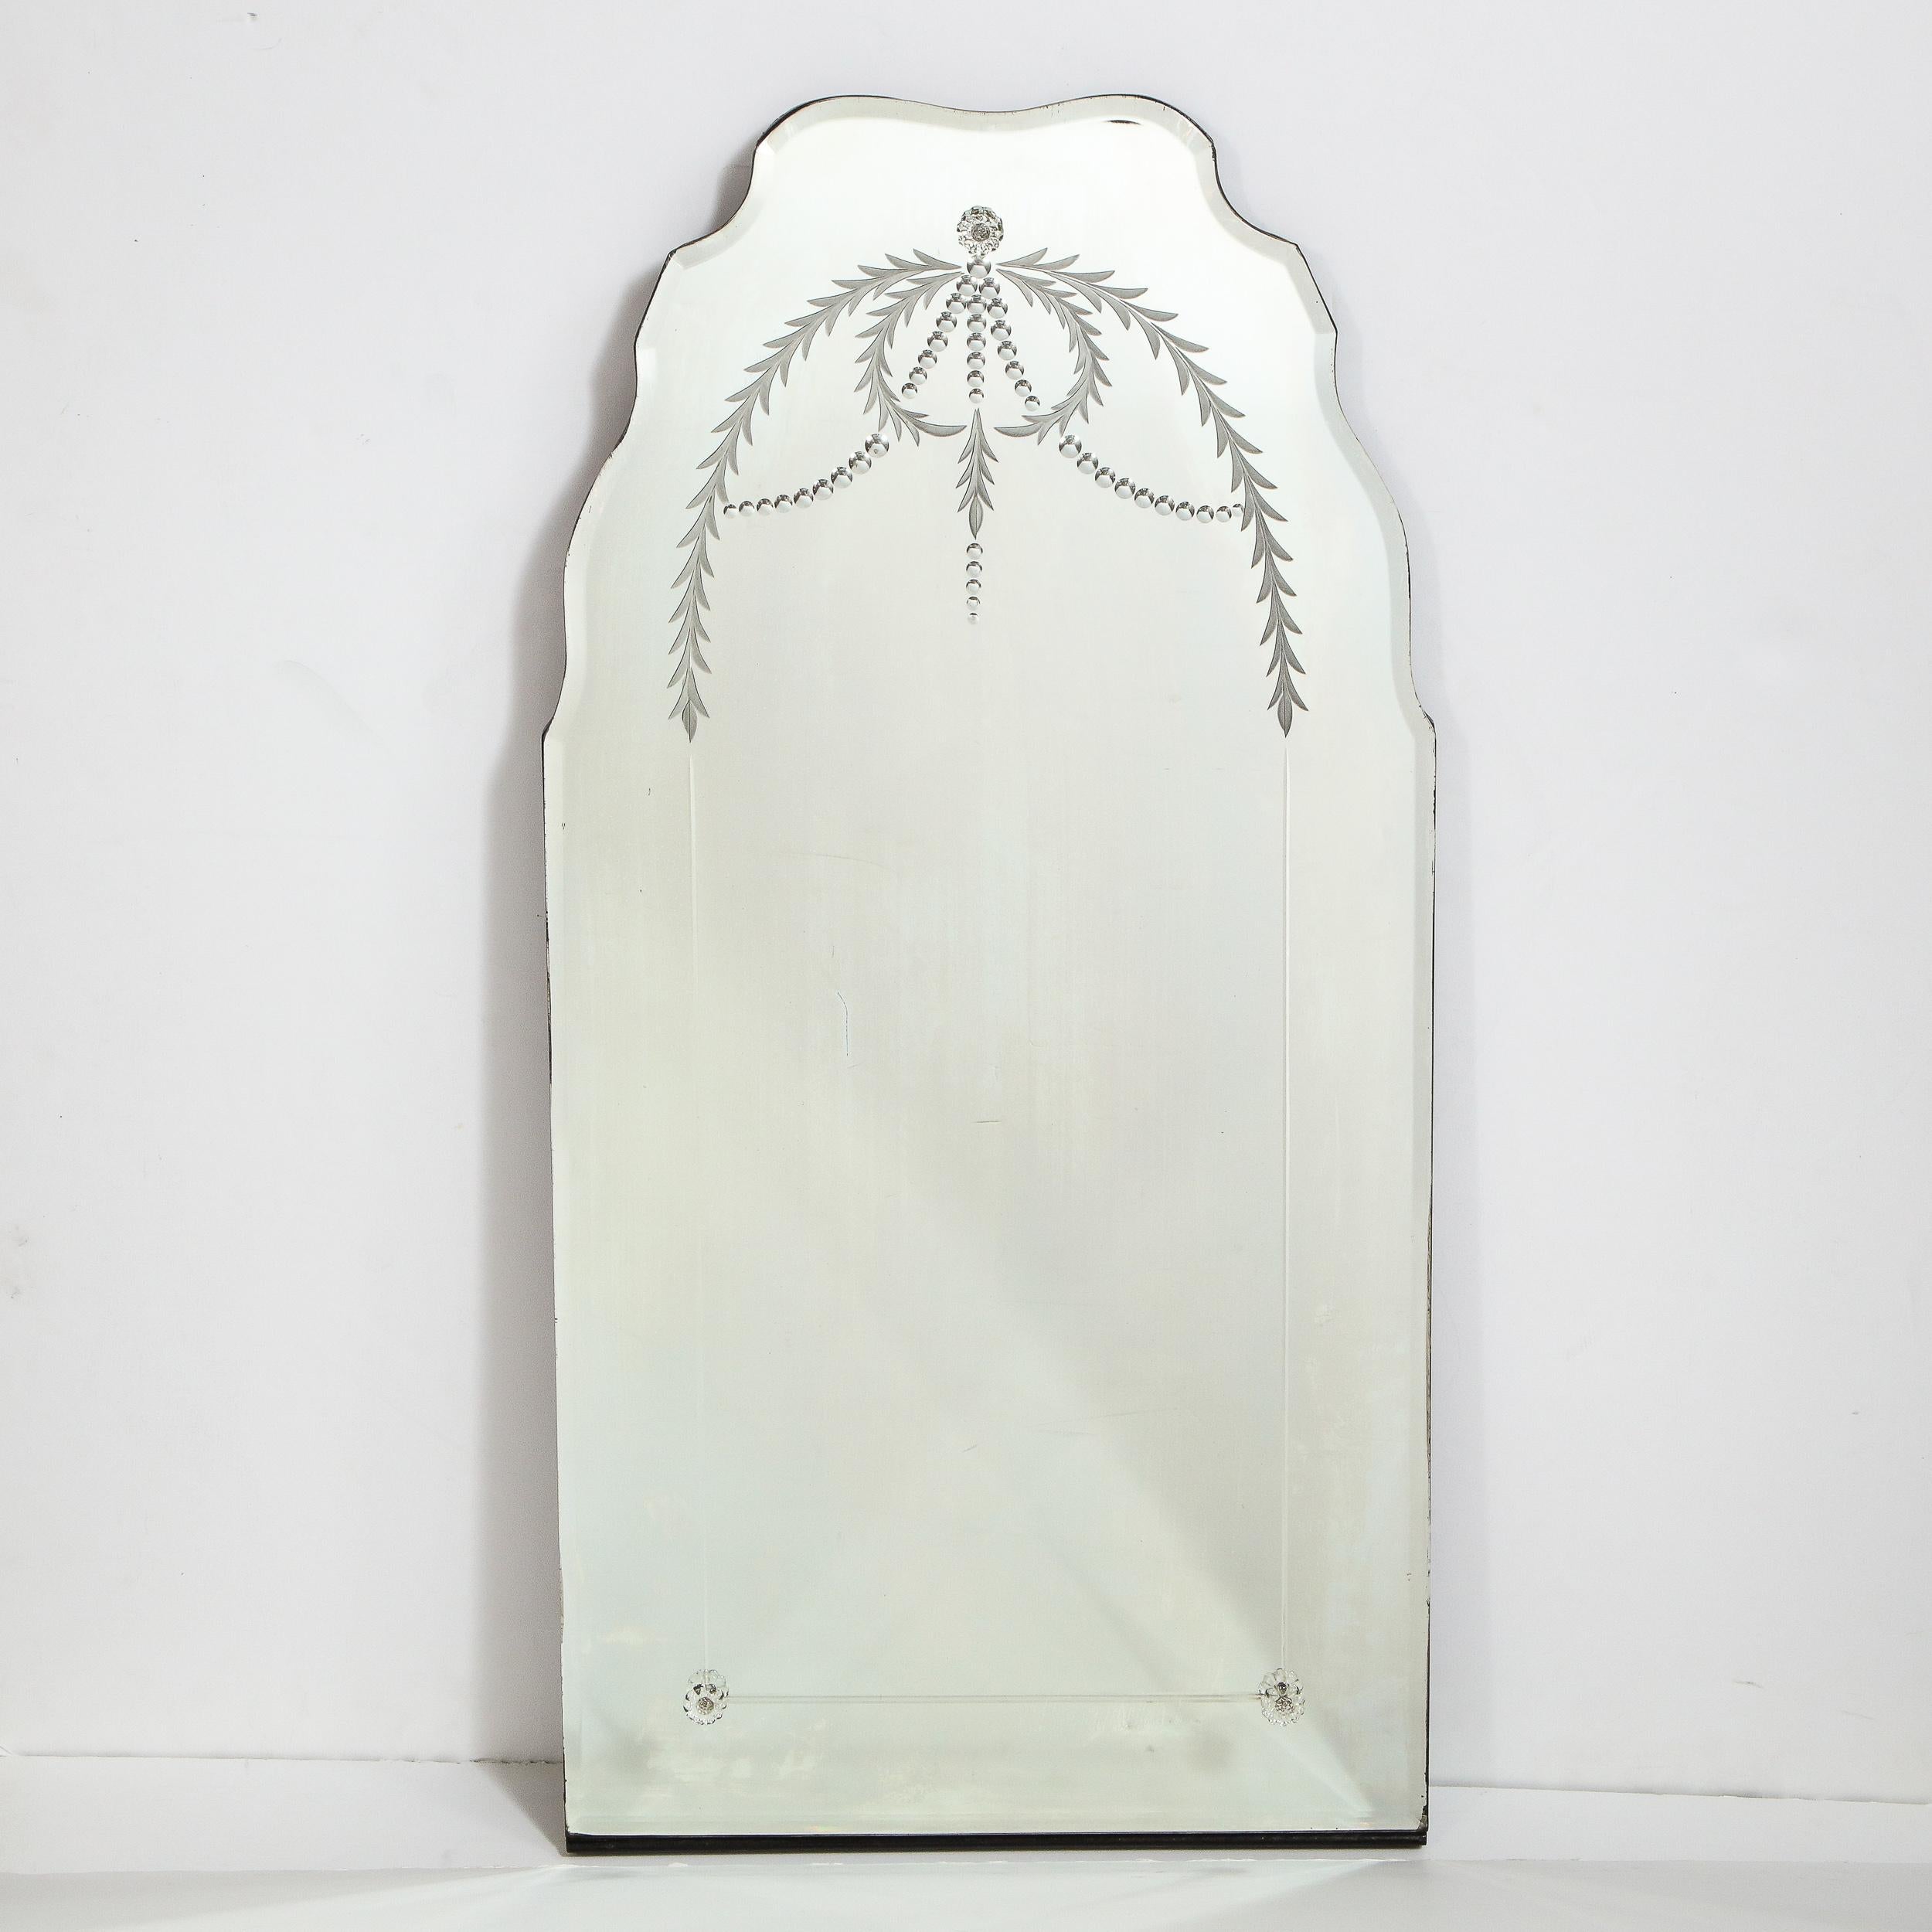 This elegant Art Deco mirror was realized in the United States circa 1940. It features a scalloped beveled border wrapped in ebonized walnut with chain beveled circular and laurel wreath motifs etched into the glass. The center of the piece also has